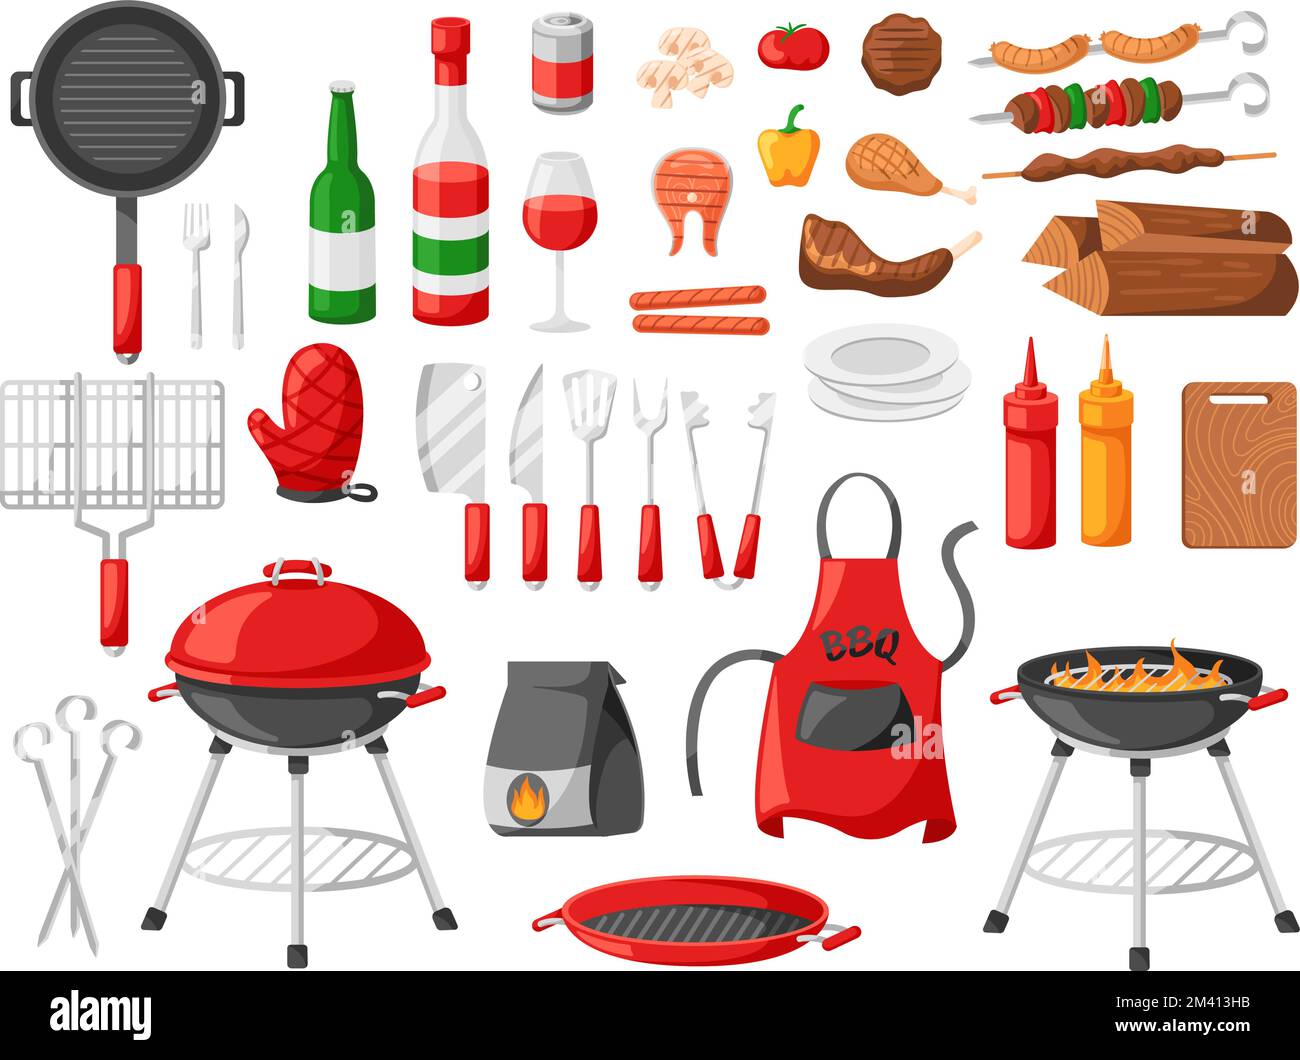 https://c8.alamy.com/comp/2M413HB/bbq-elements-grill-cooking-tools-for-barbecue-summer-party-roasted-on-fire-meat-food-cartoon-vector-set-2M413HB.jpg